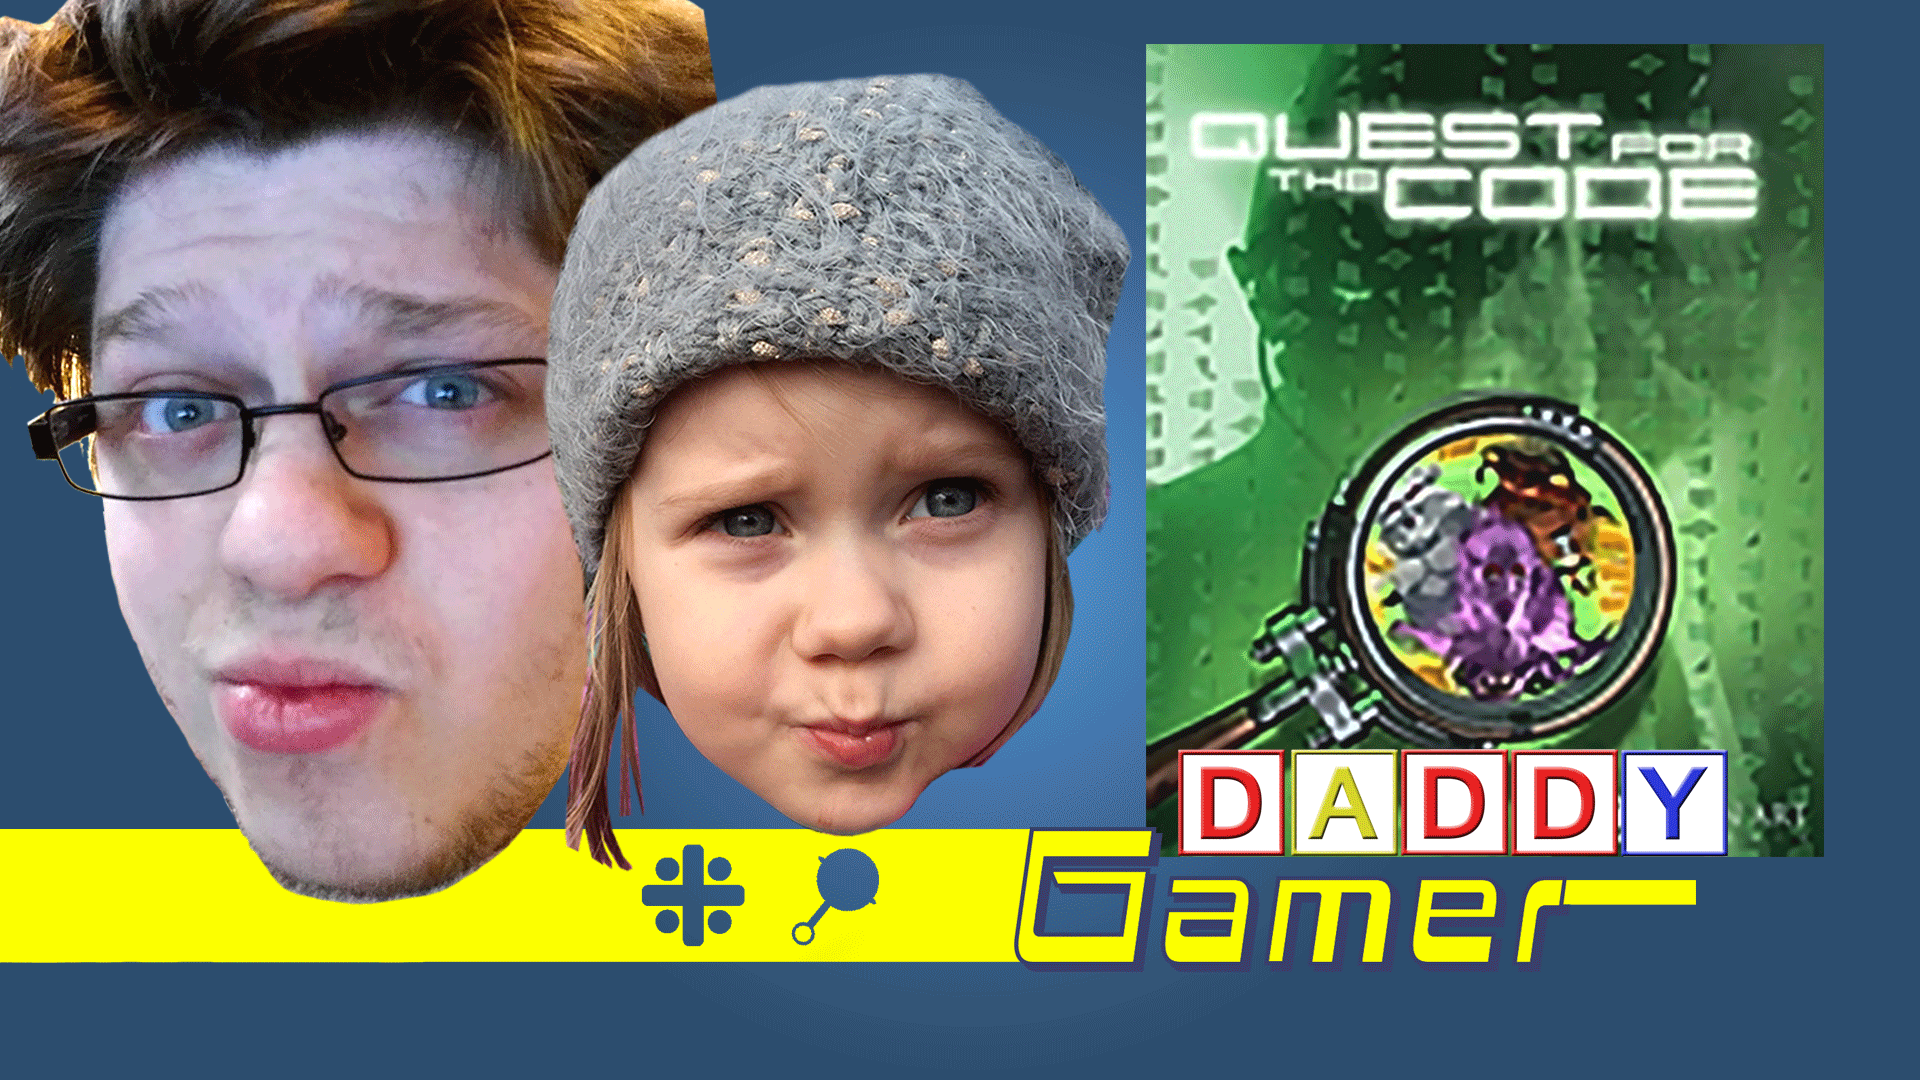 Daddy Gamer Episode 07: Quest for the Code